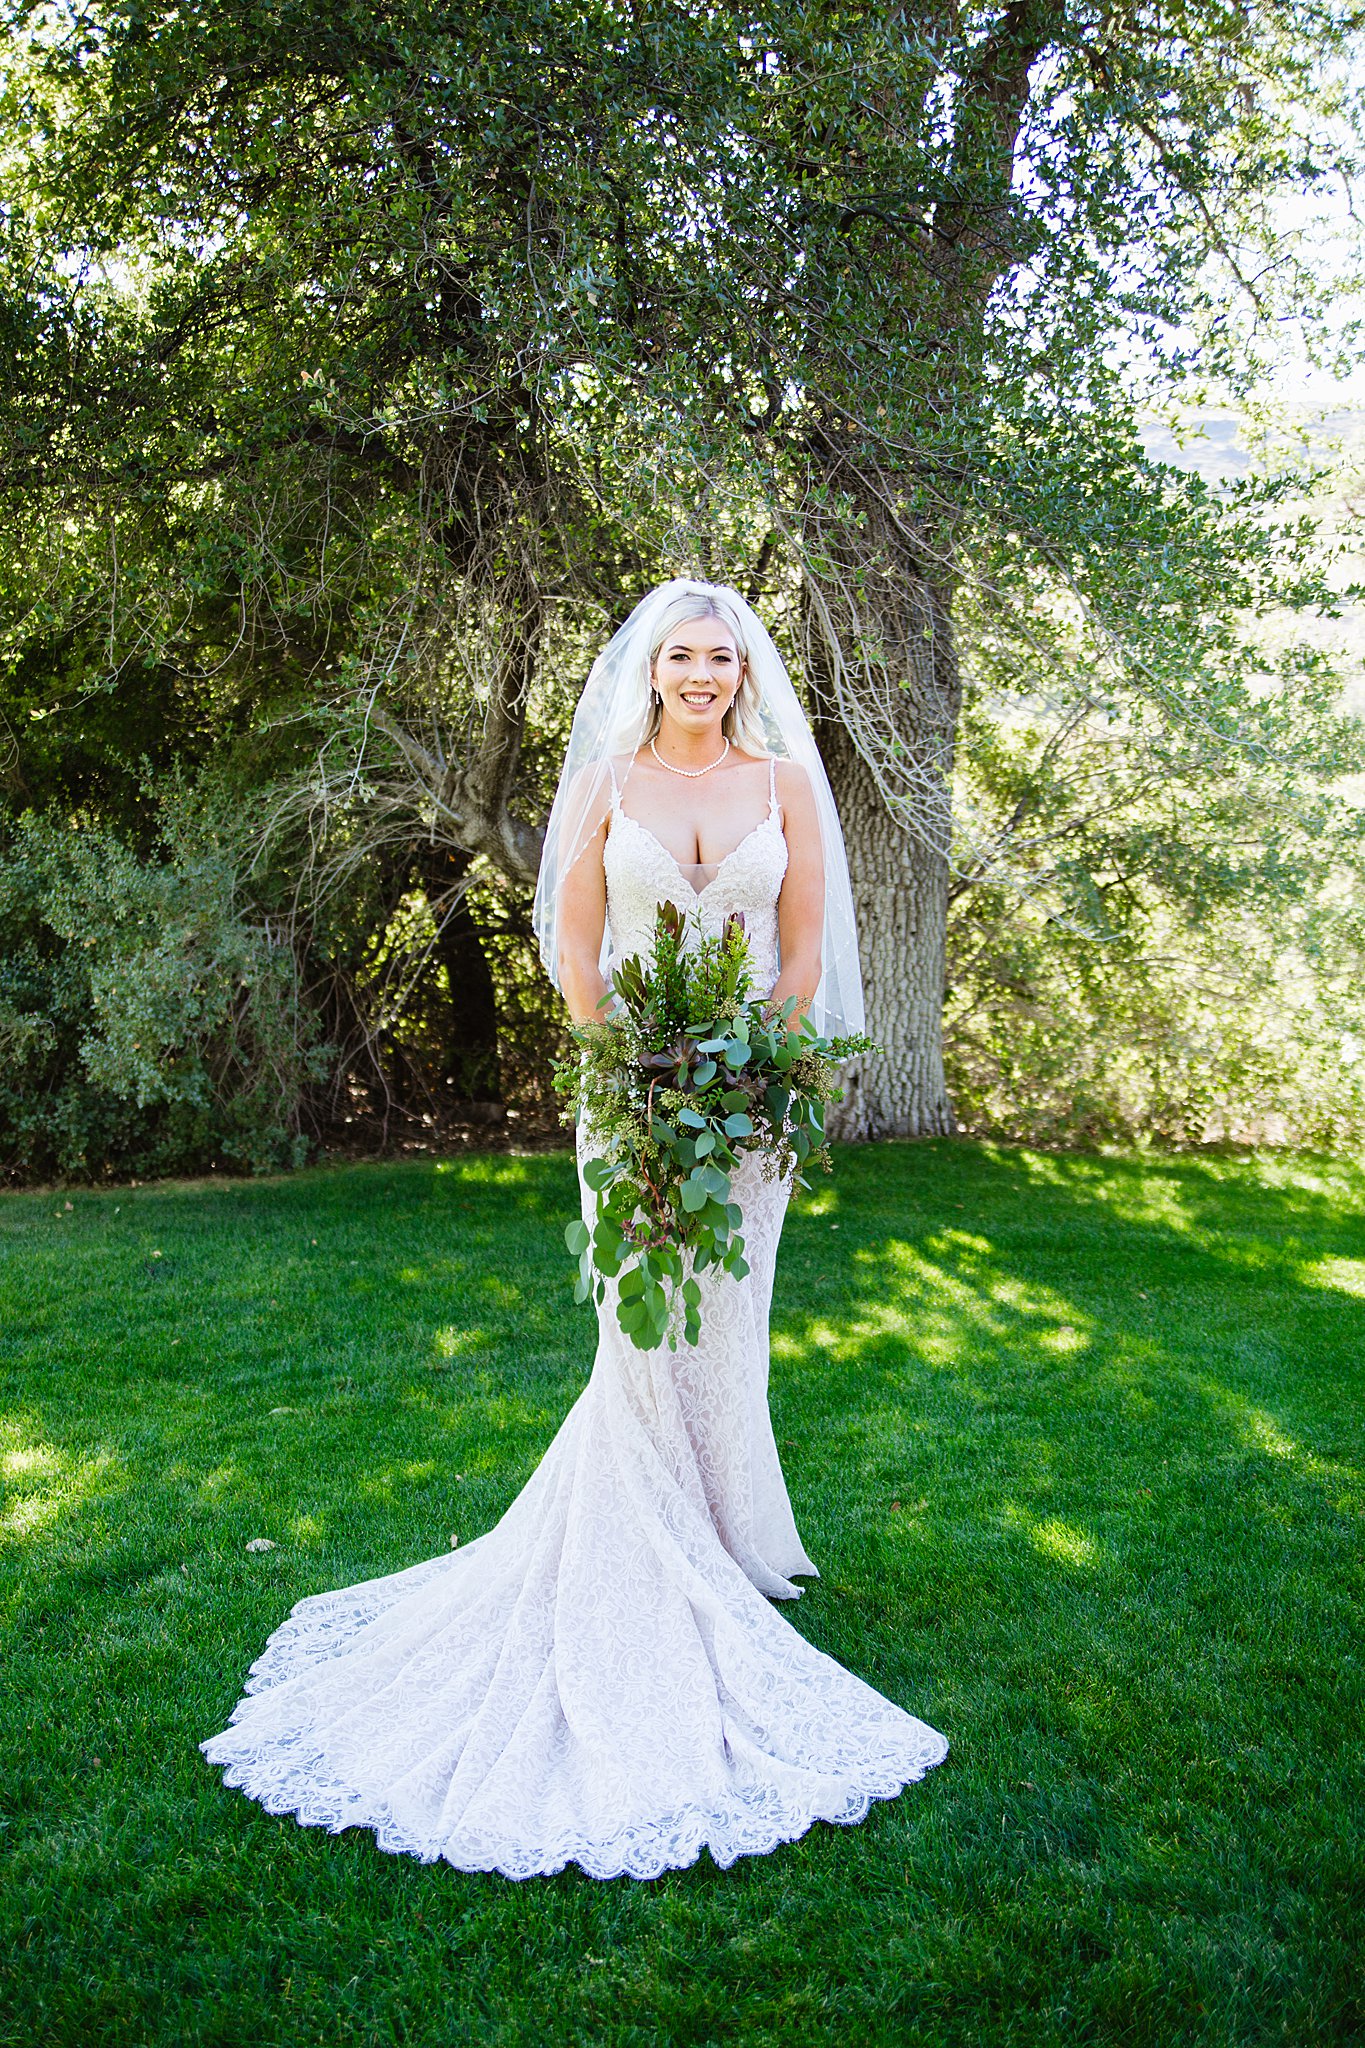 Bride's romantic lace mermaid wedding dress for her Van Dickson Ranch wedding by PMA Photography.